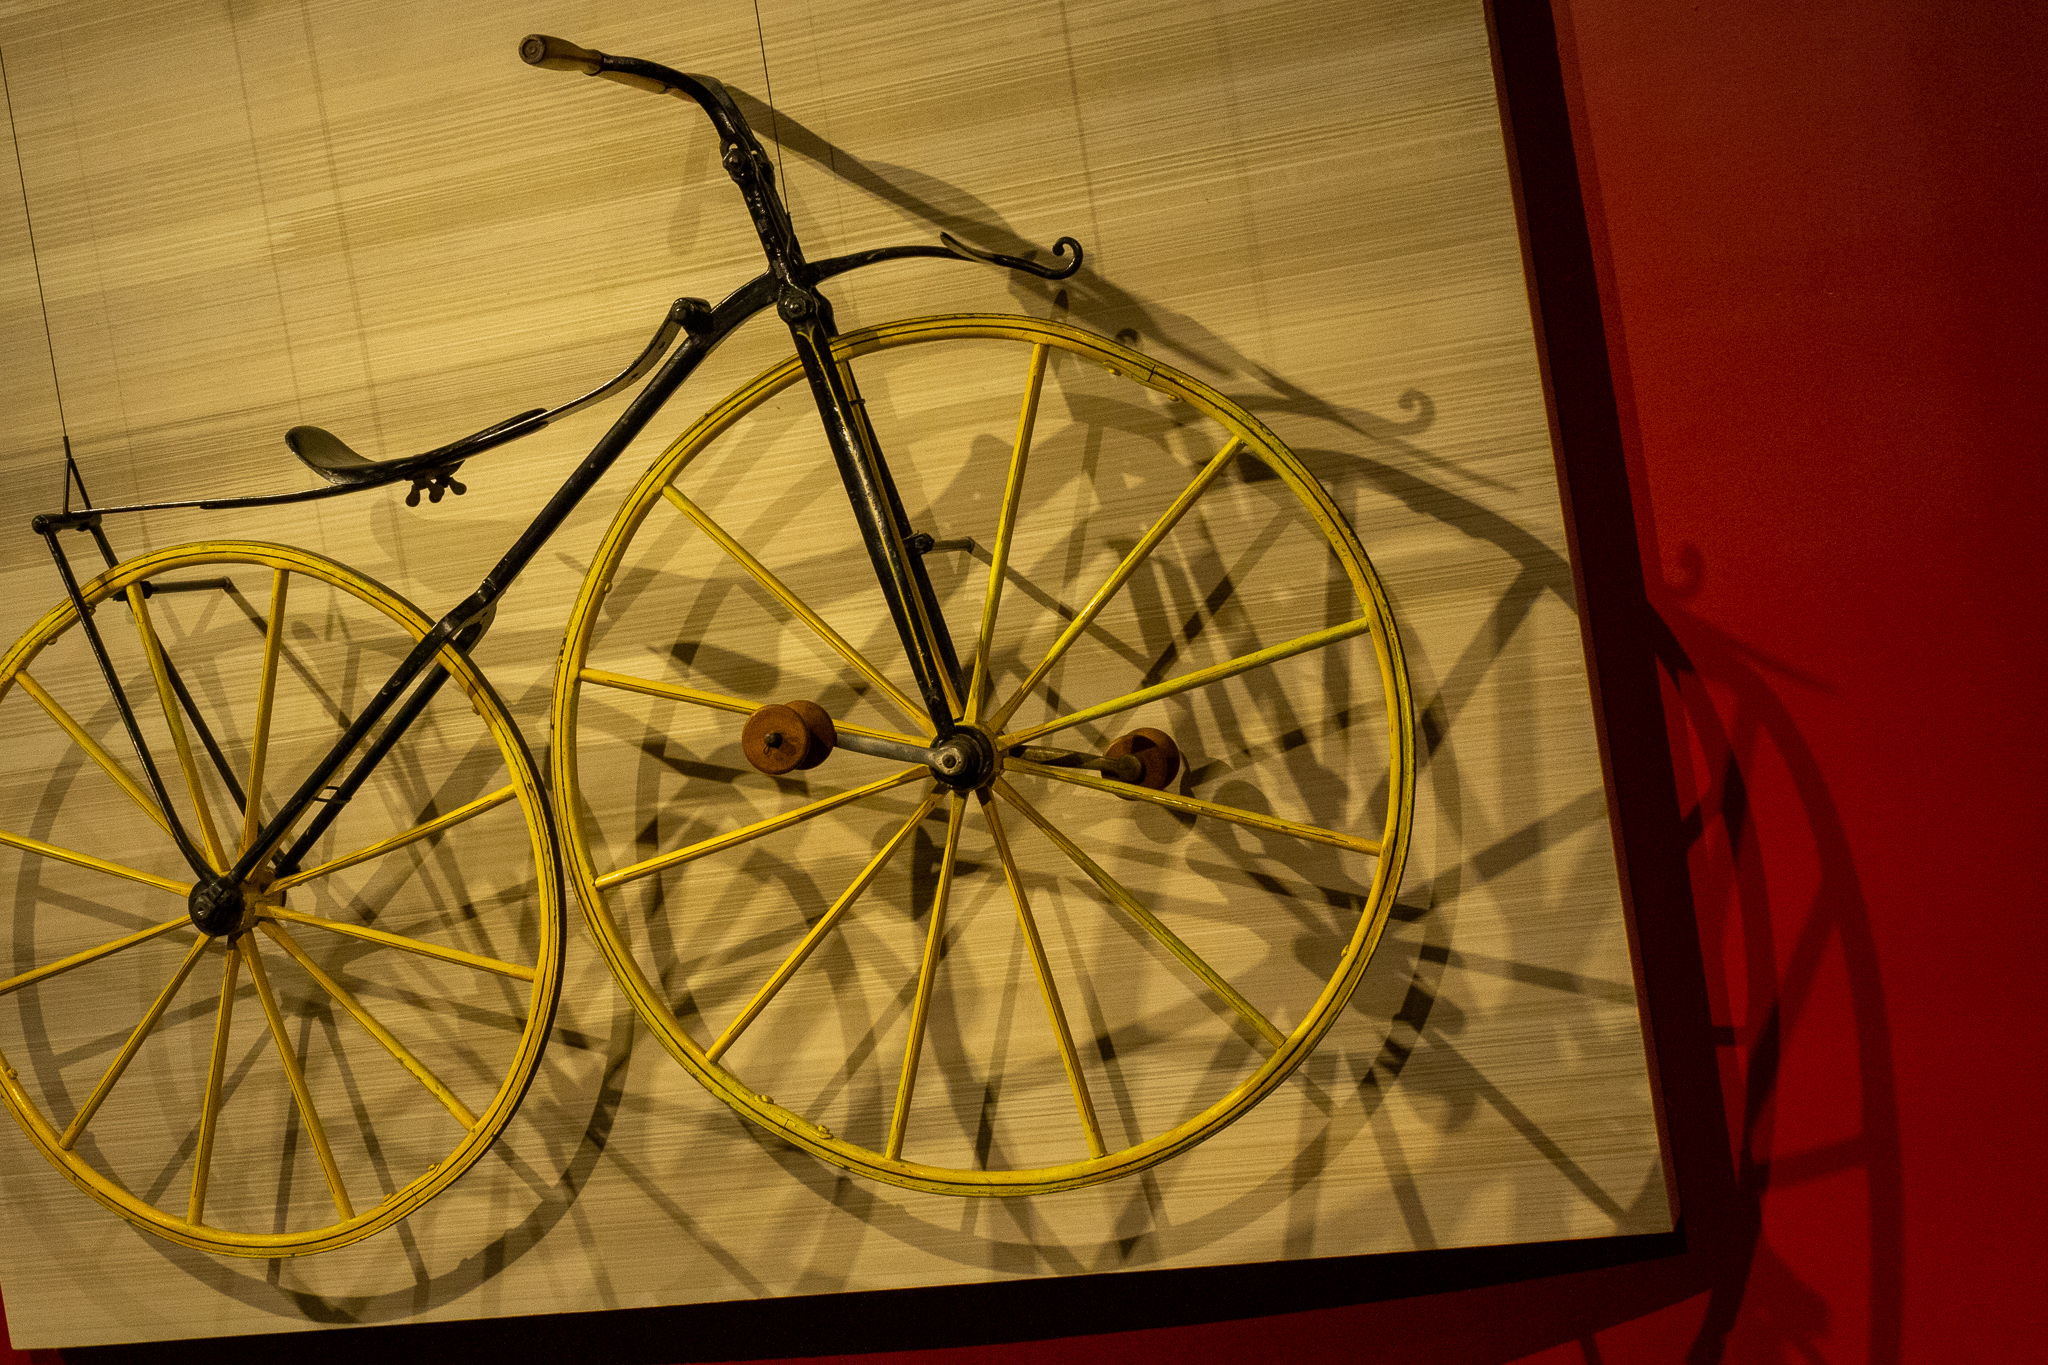 An old bicycle mounted on a museum wall with the shadows of its spokes spread on the wall behind it